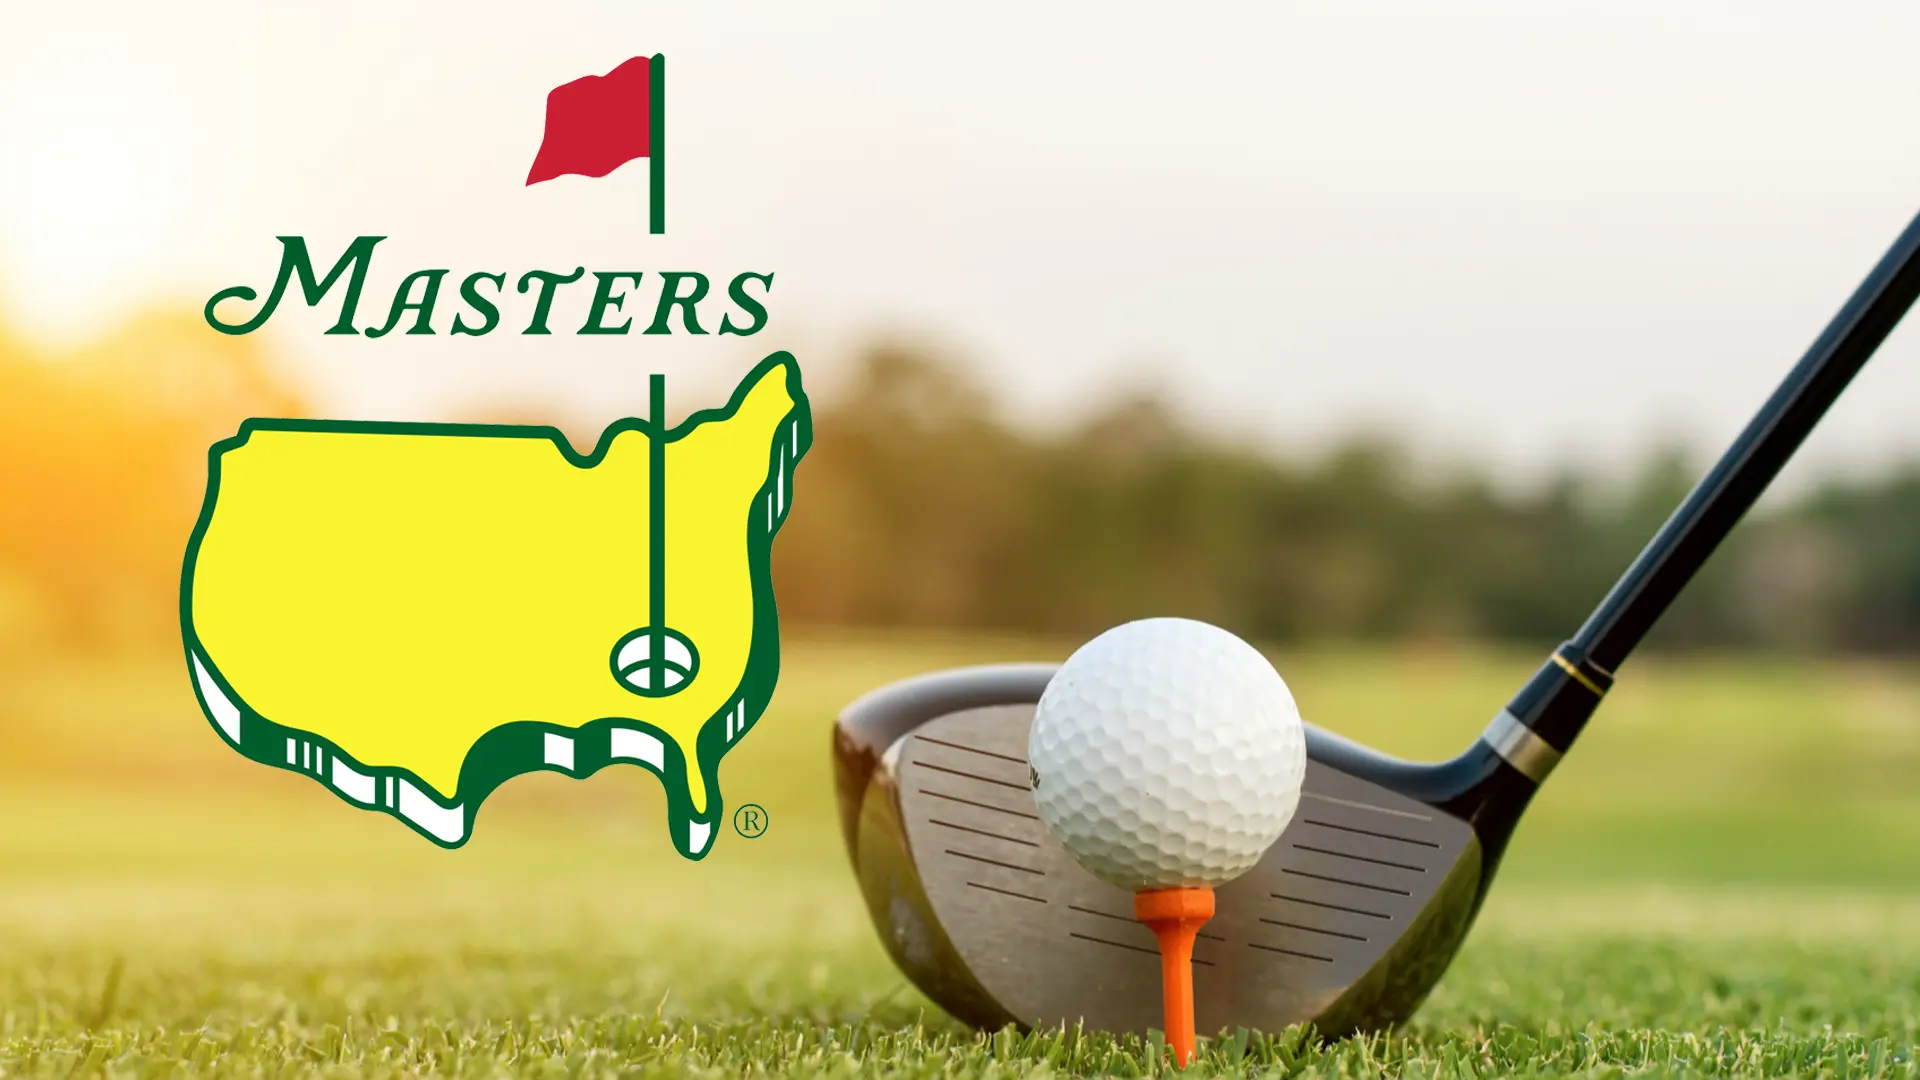 THE MASTERS ODDS AND PREVIEW